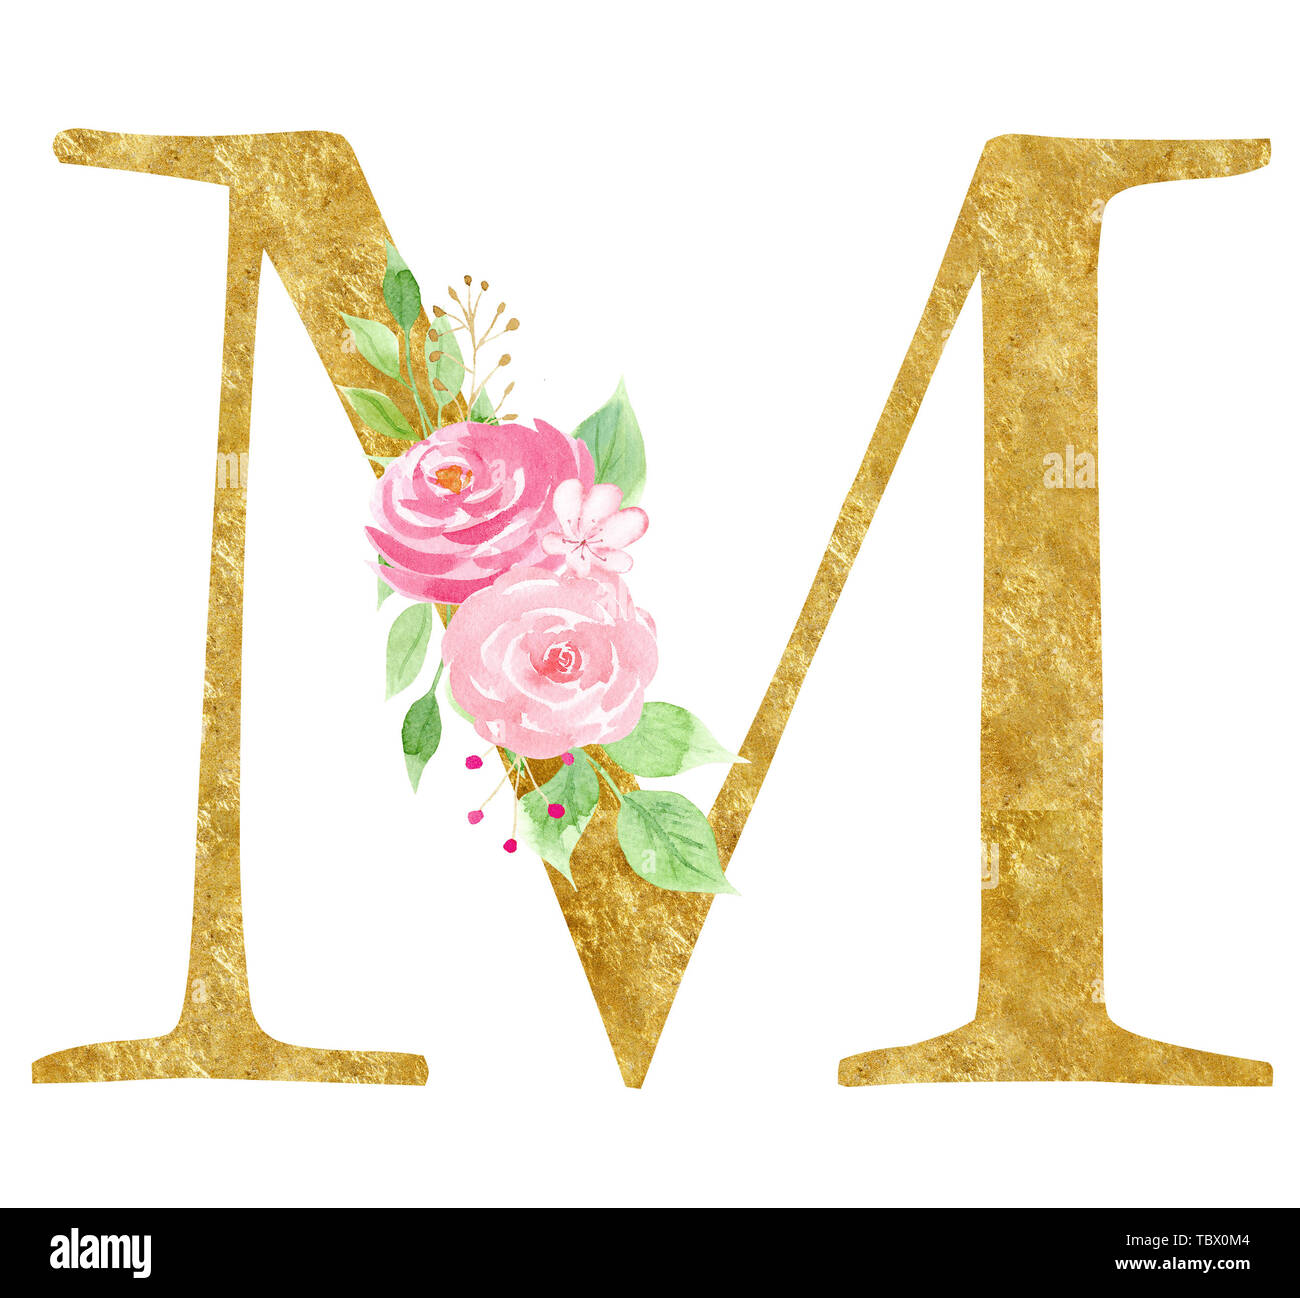 M letter with blooming flowers raster illustration. Latin alphabet sign with elegant flowering watercolor painting. Cardboard consonant with gold text Stock Photo